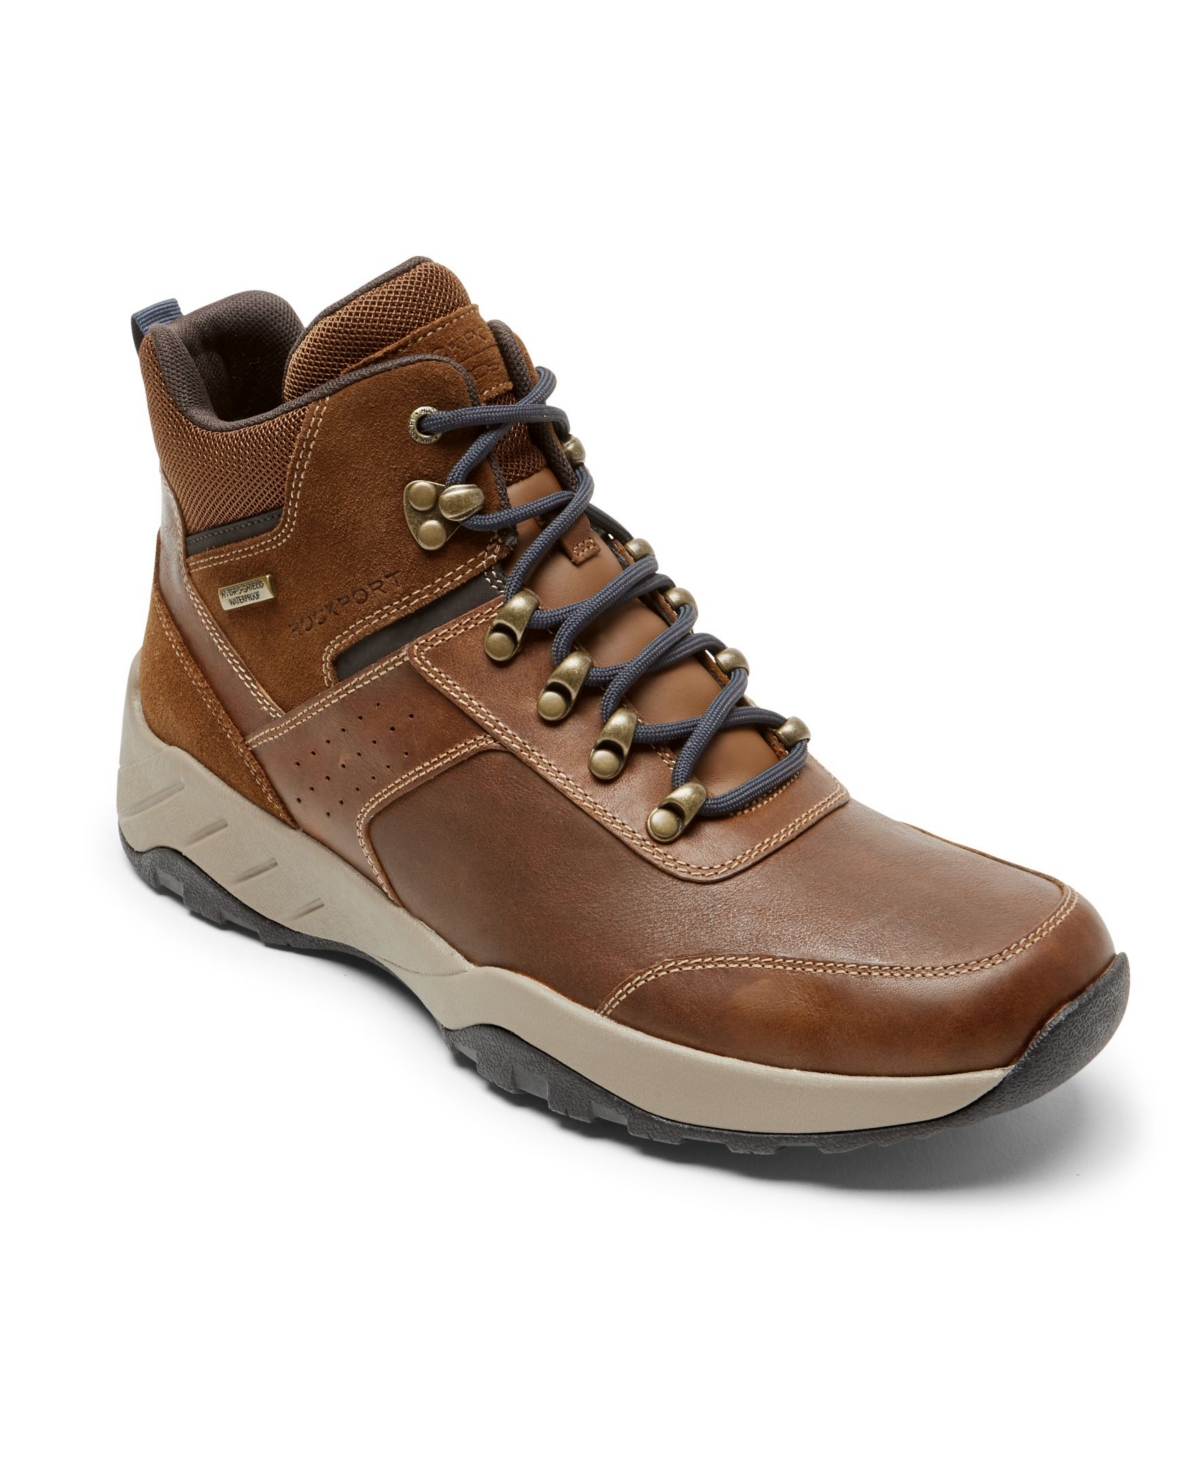 Men's Xcs Spruce Peak Hiker Shoes - Leather Brown Leather